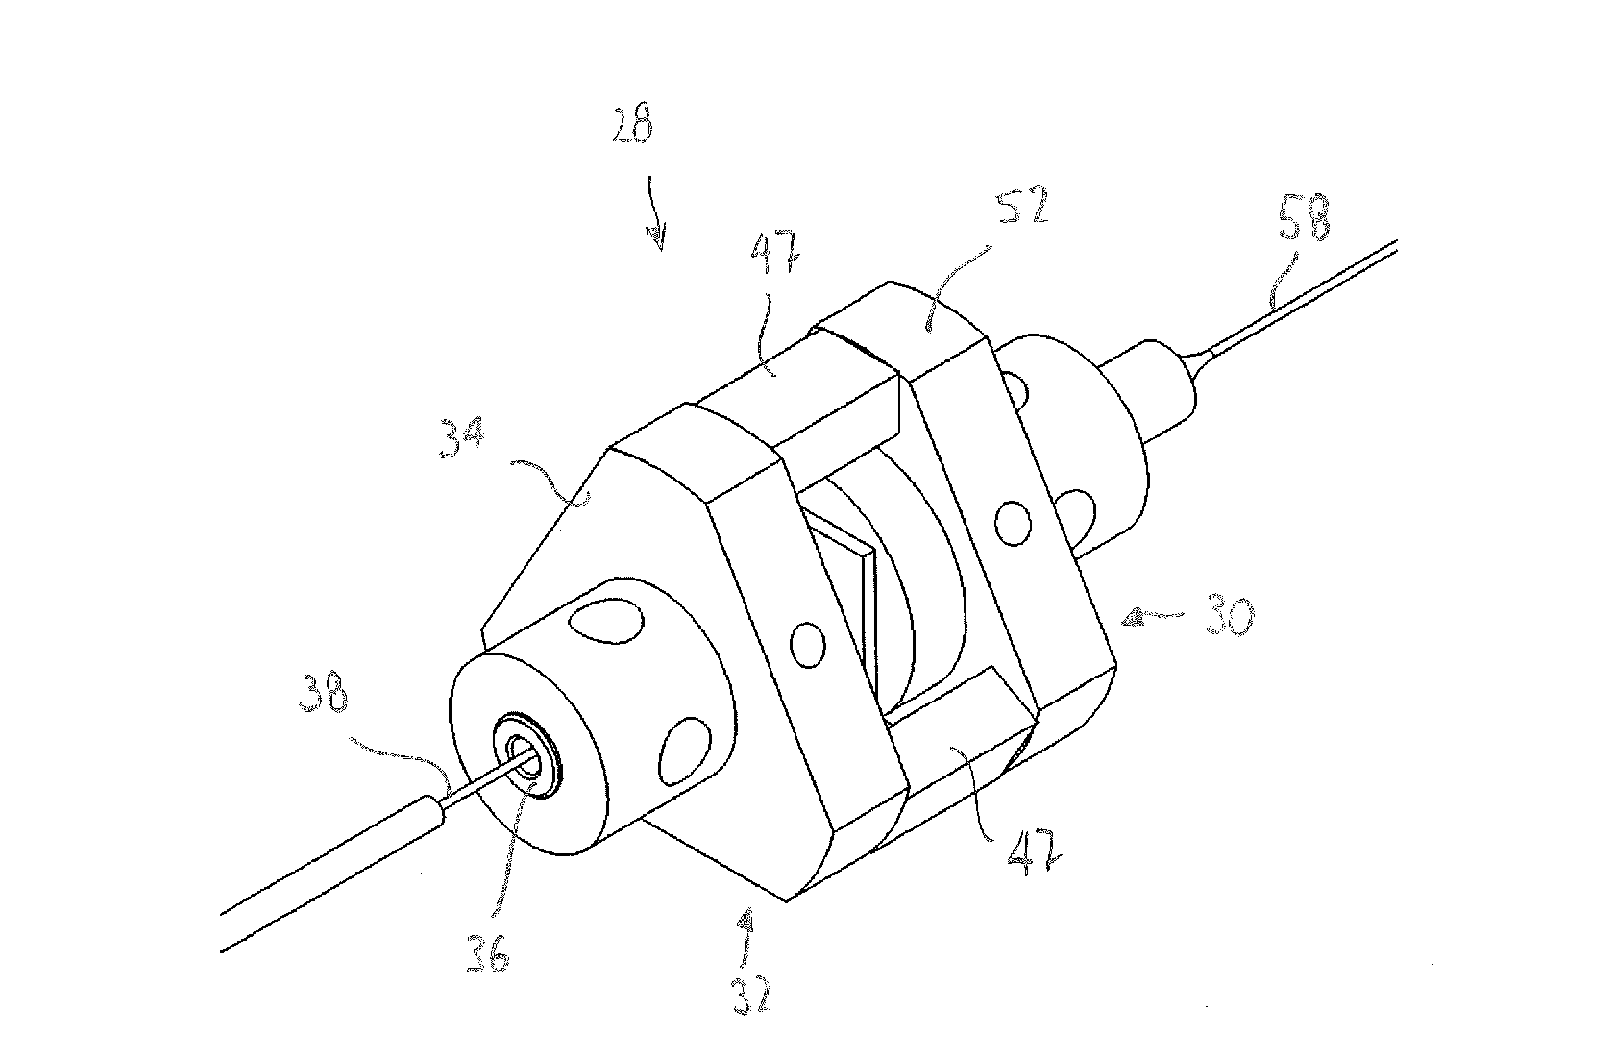 Dynamical Fabry-Pérot Tuneable Filter Device